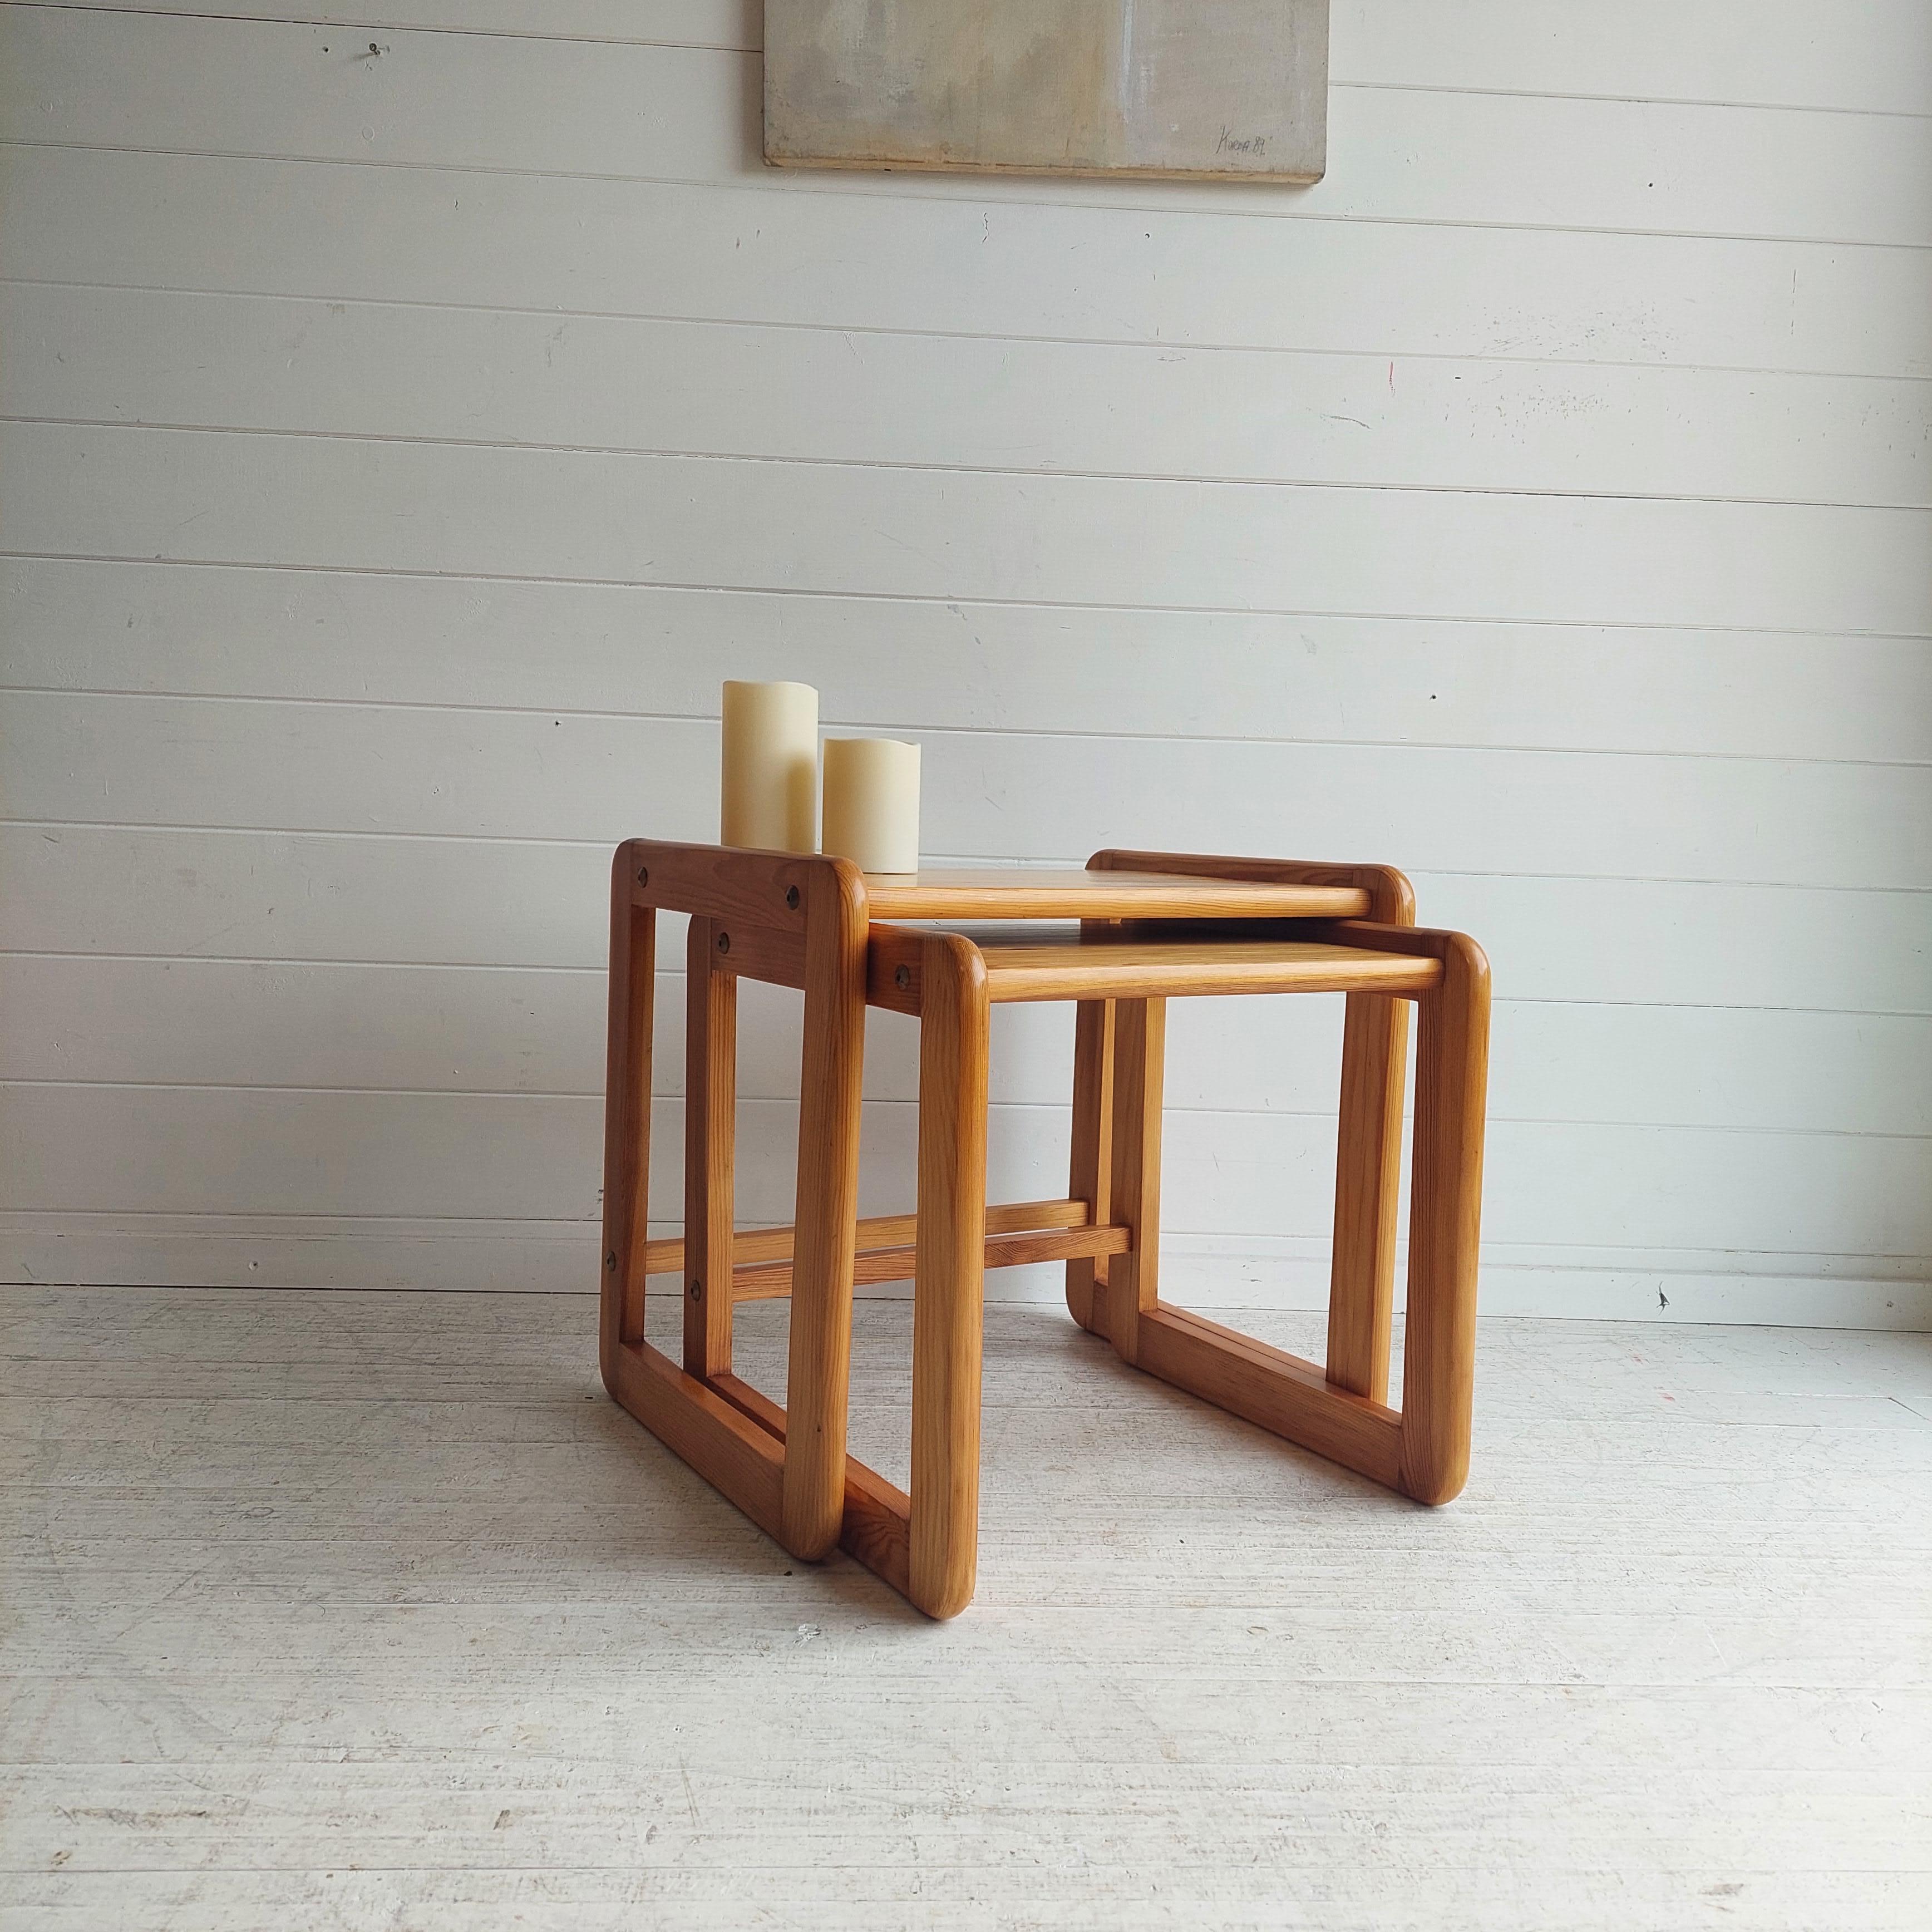 European Mid Century Scandinavian Nest Of Tables In Pine From The 70s